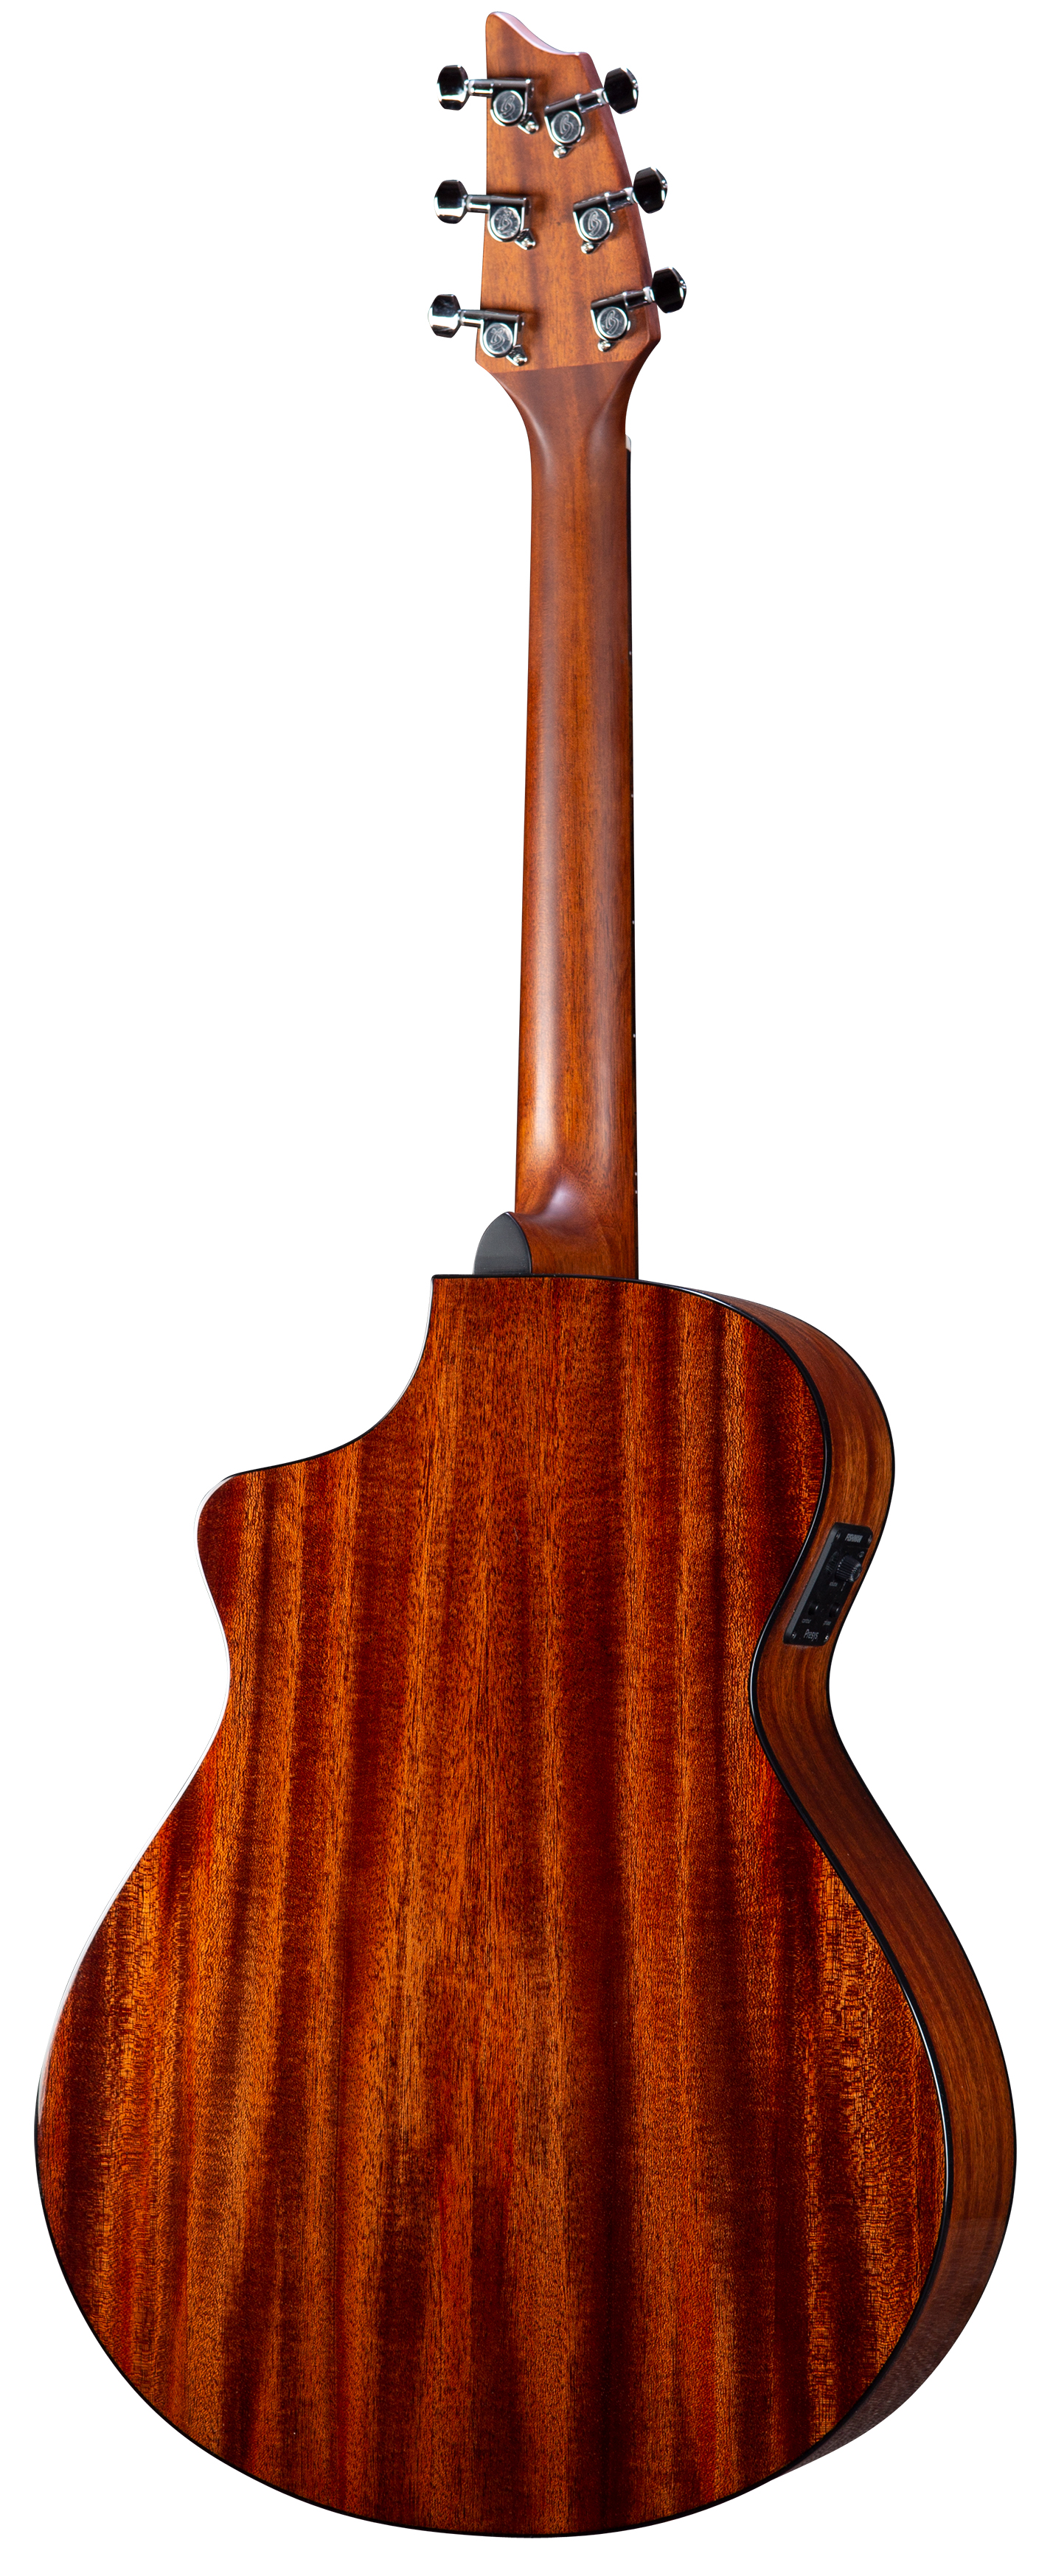 Breedlove® Discovery S Concert CE EB CED 